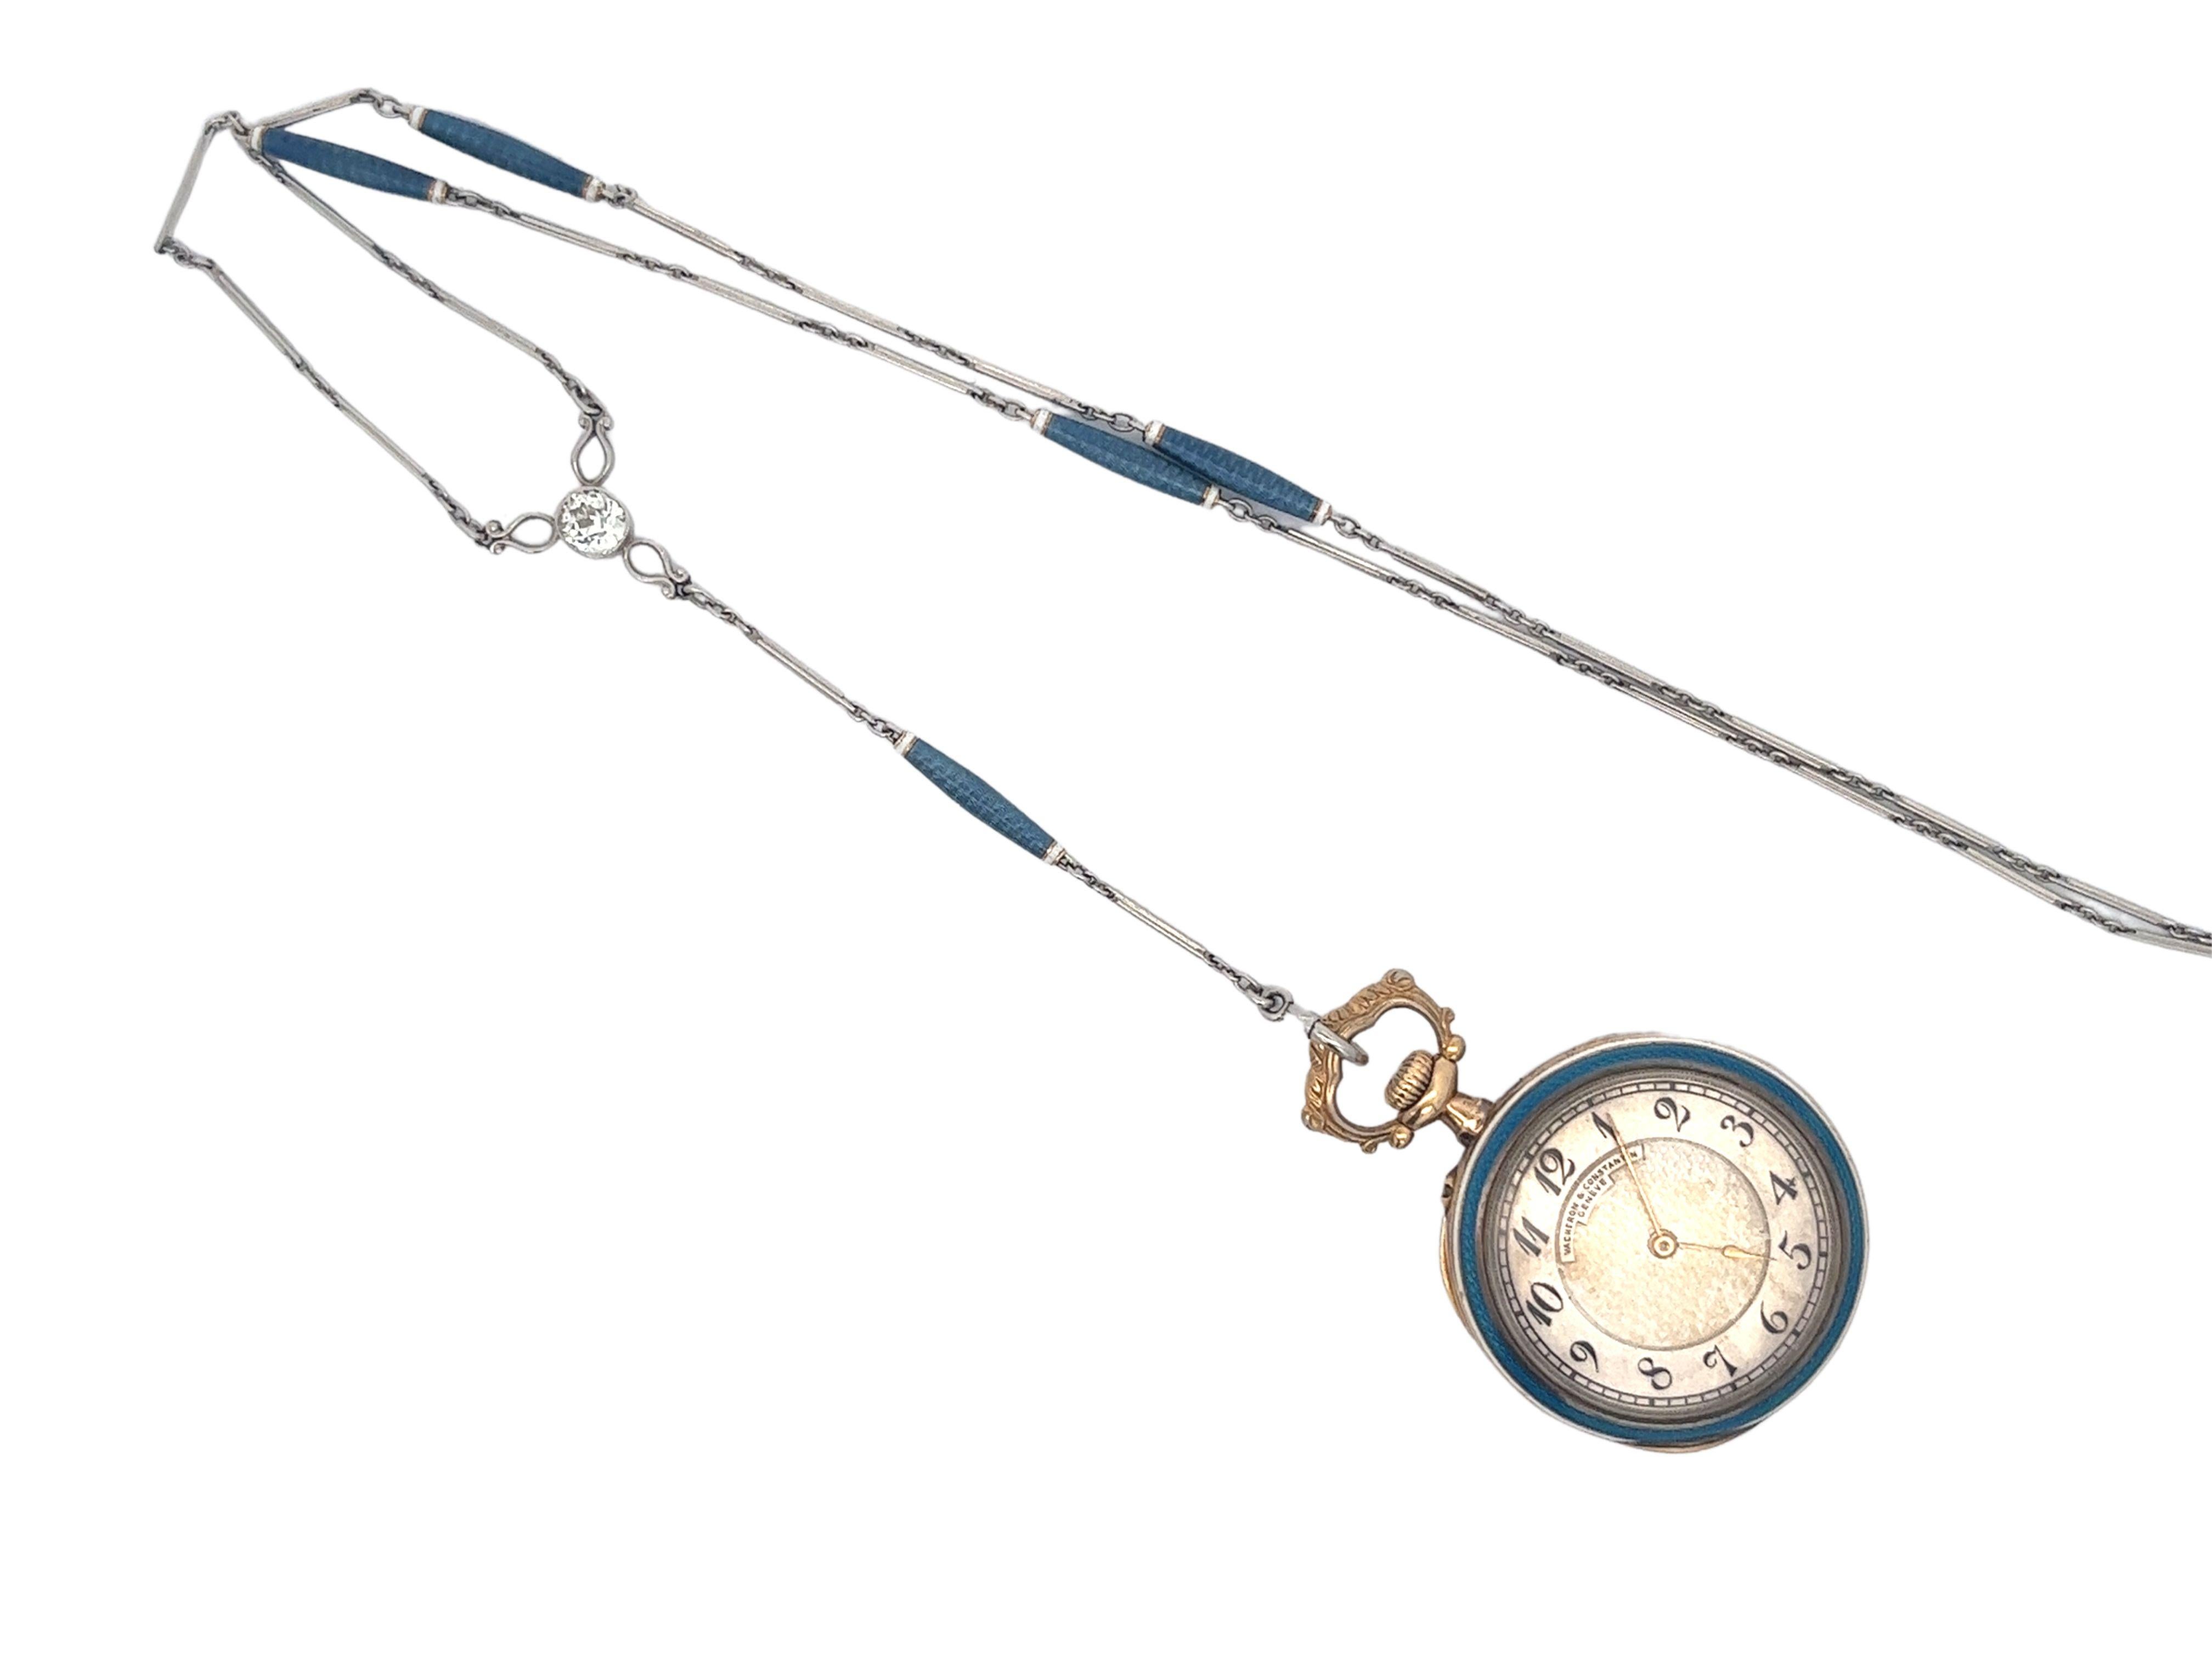 The following is a custom-made Vacheron and Constantin pocket watch pendant adorned with blue enamel and a 0.50ct G-H VS old European cut diamond.

Item Details:
- Brand: Vacheron Constantin
- Retailer: Bailey Banks and Biddle
- Commissioned For